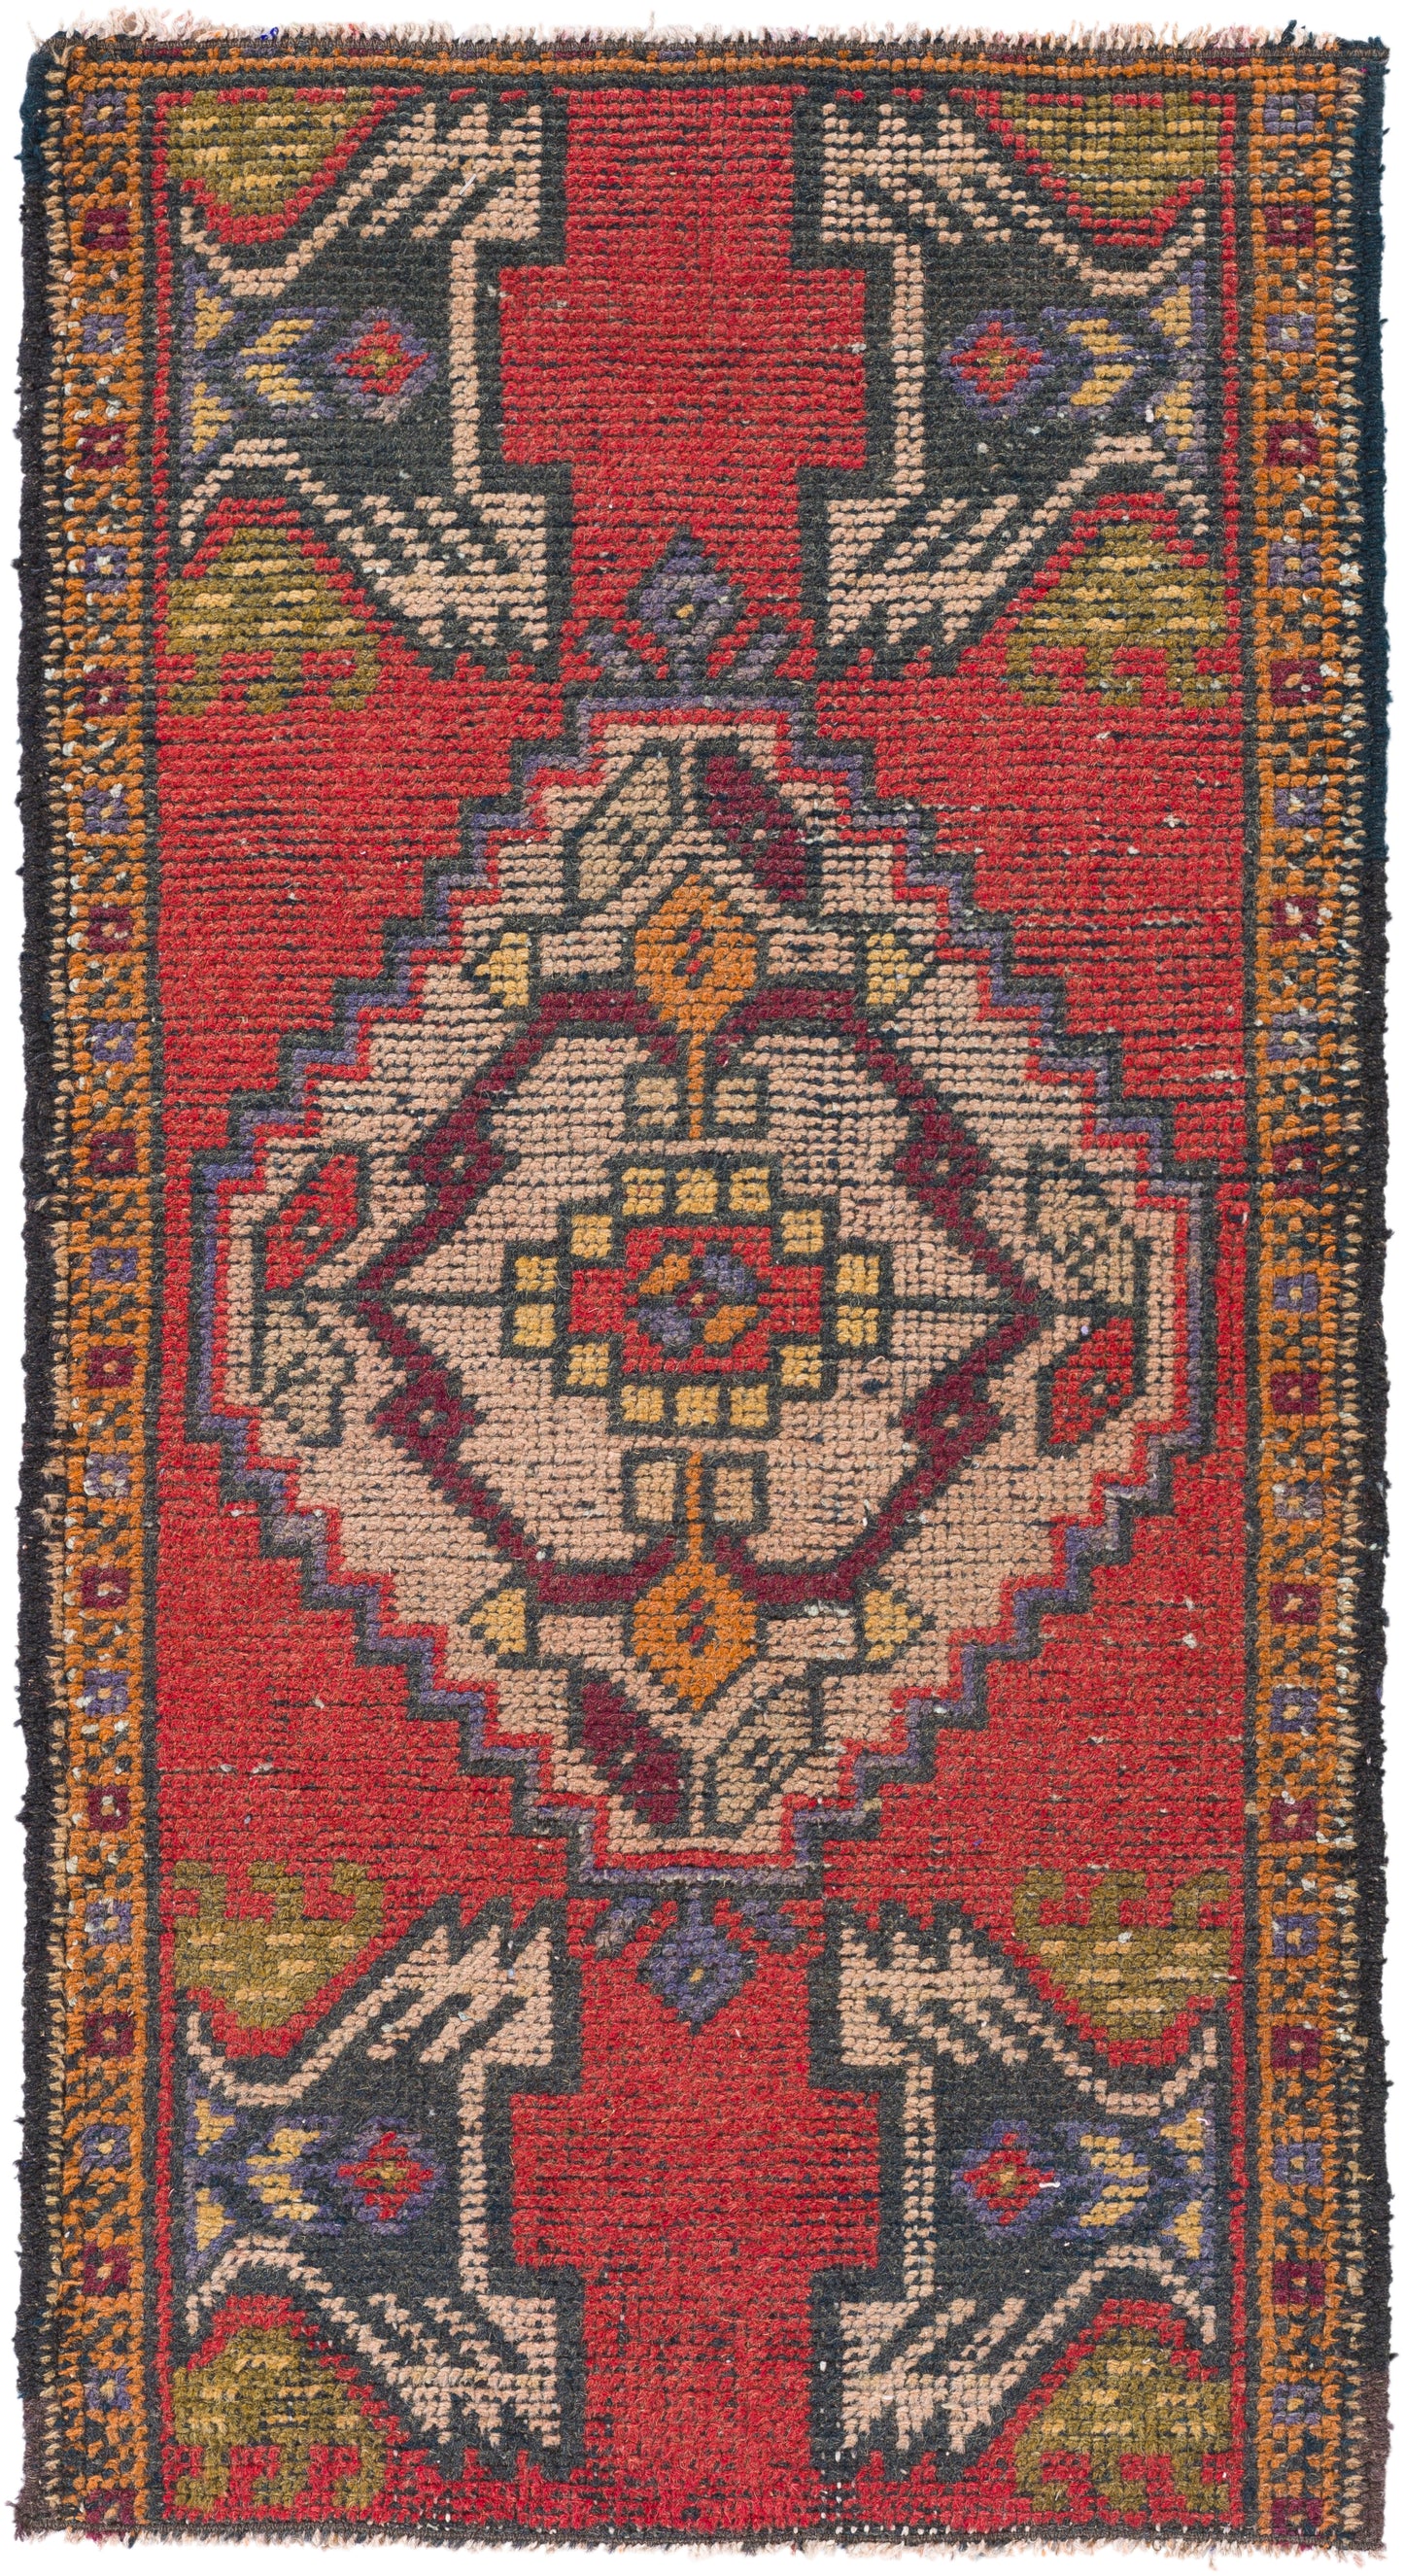 Antique One of a Kind 27473 Hand Knotted Wool Indoor Area Rug by Surya Rugs